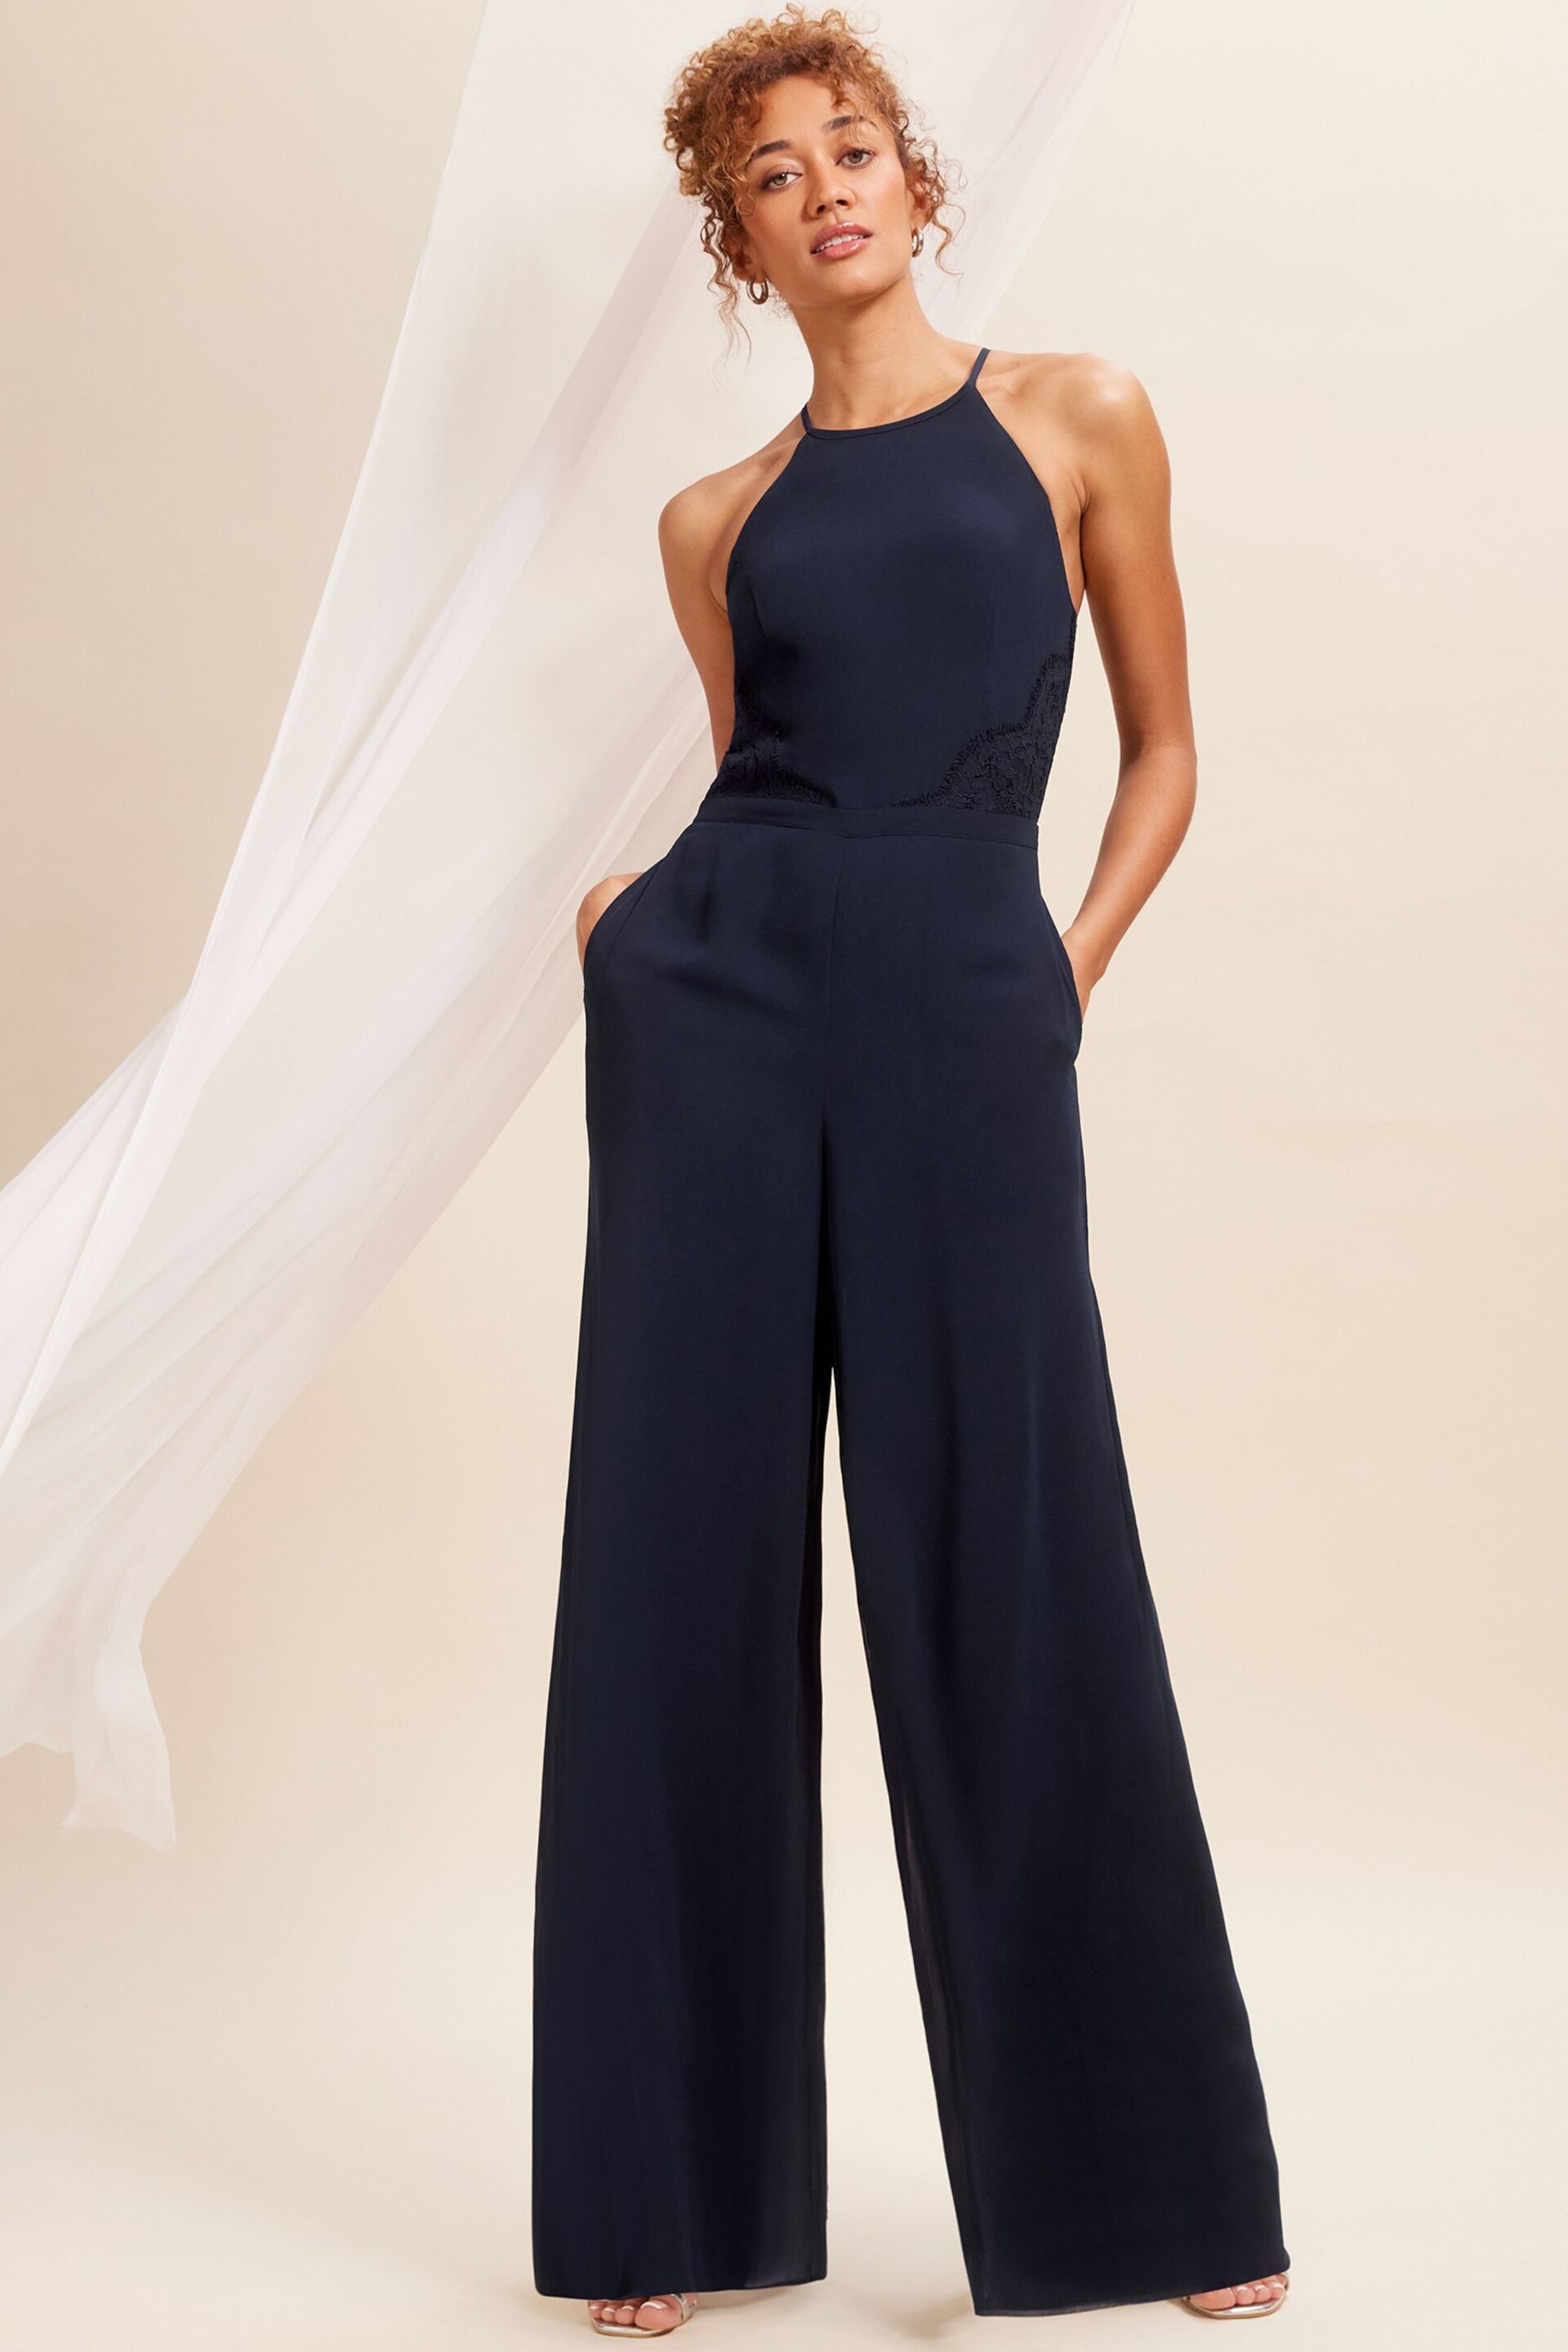 Love & Roses Navy Petite Lace Insert Bridesmaid Wide Leg Jumpsuit - Image 1 of 4